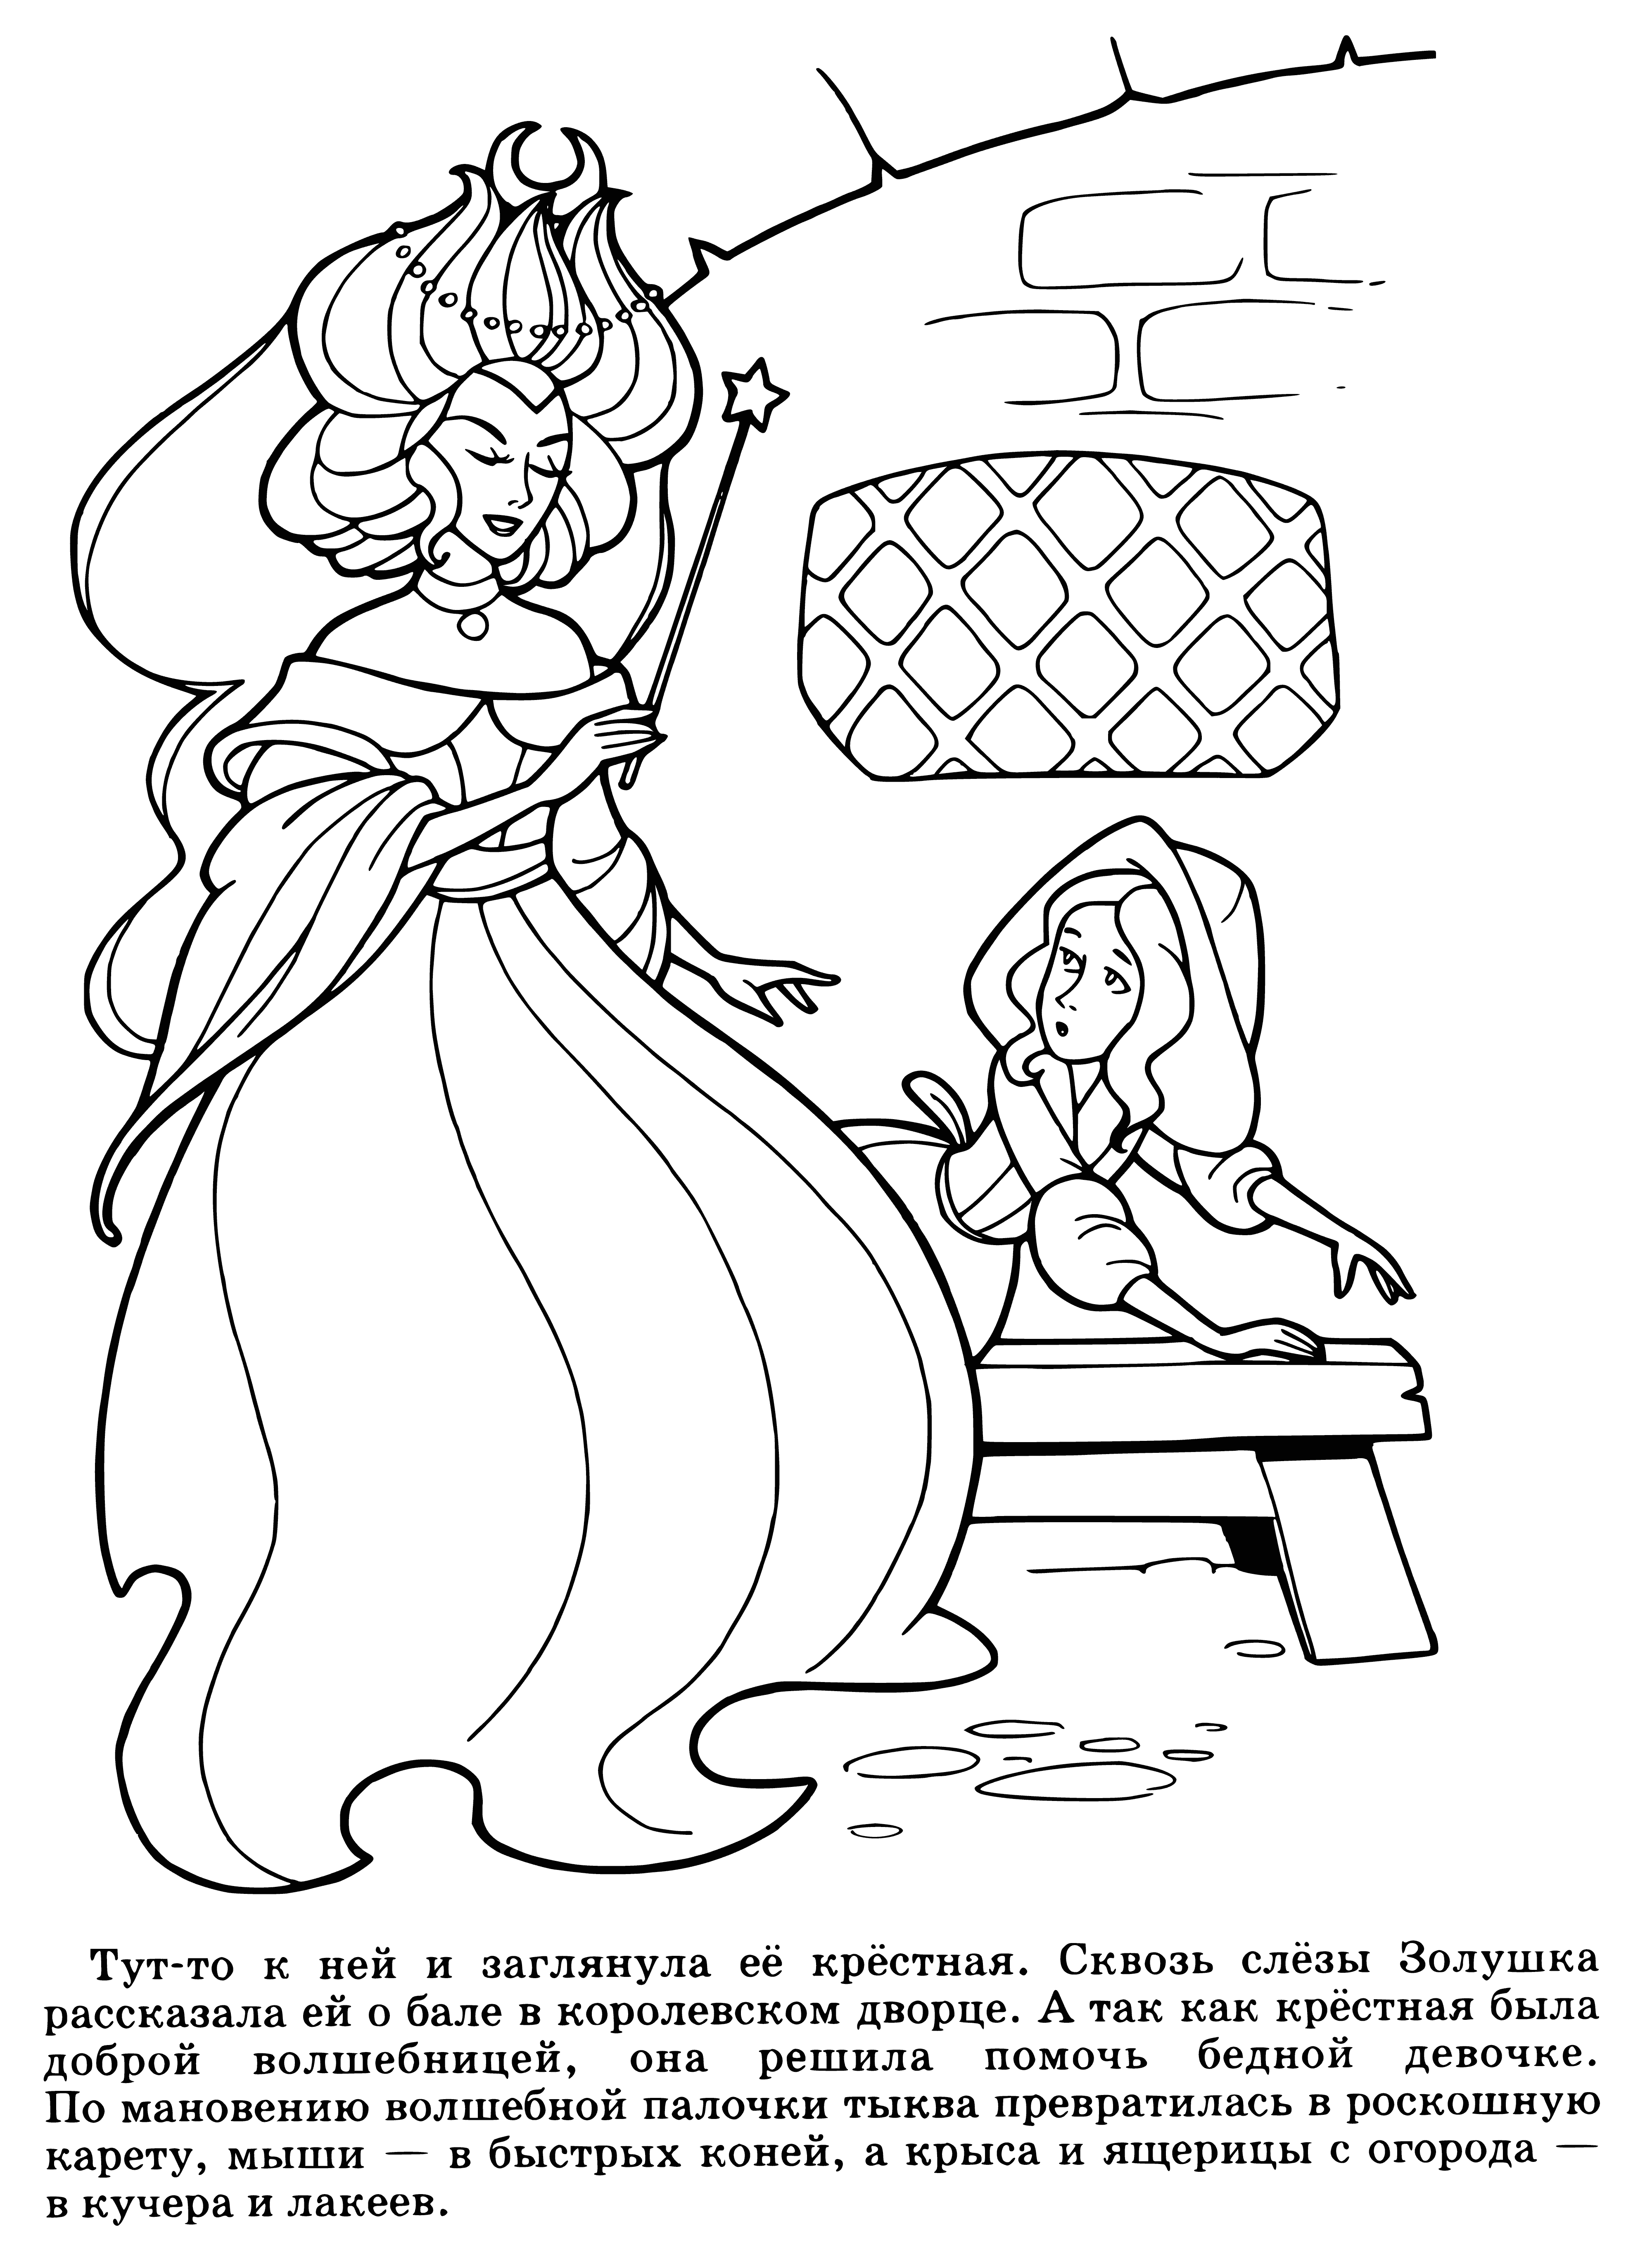 coloring page: Once upon a time, a woman's luck changed when she met a fairy godmother who gave her a magical wand & made her wish for a better life come true. She got a new job, home, wardrobe & a prince, and lived happily ever after.